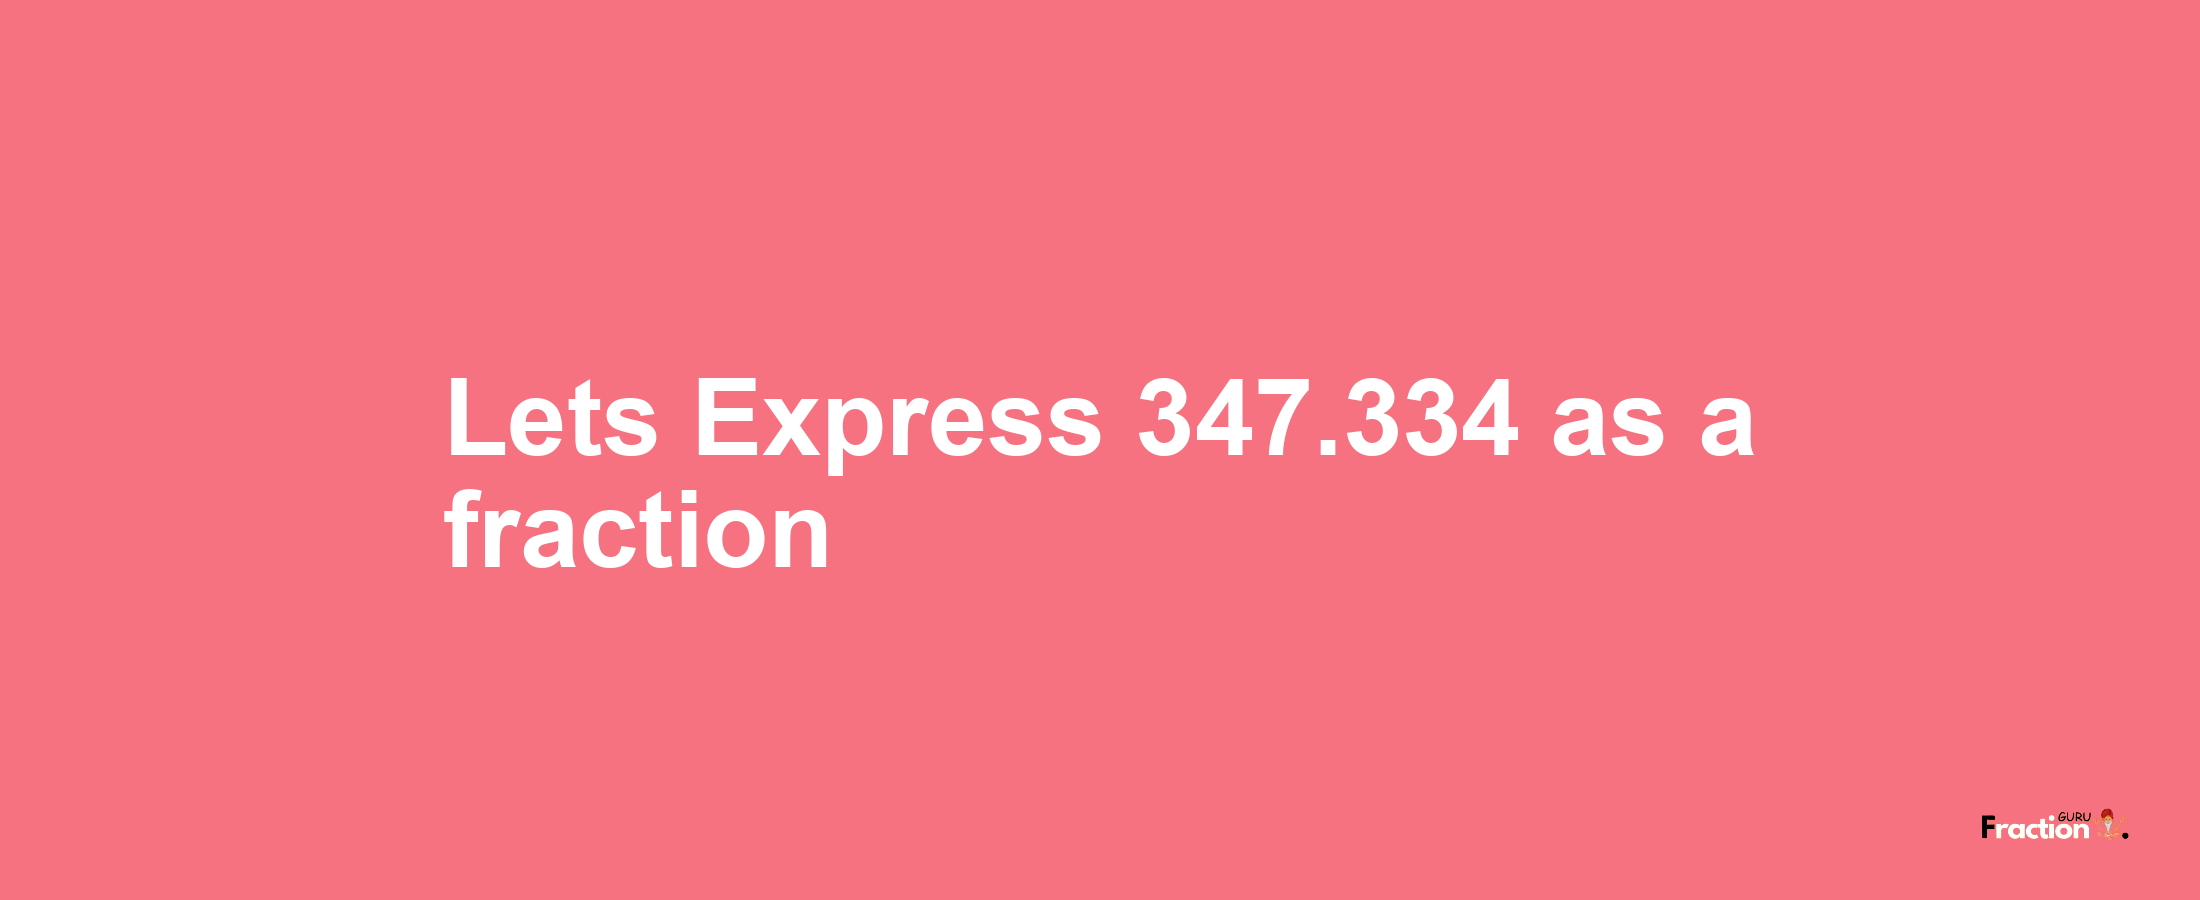 Lets Express 347.334 as afraction